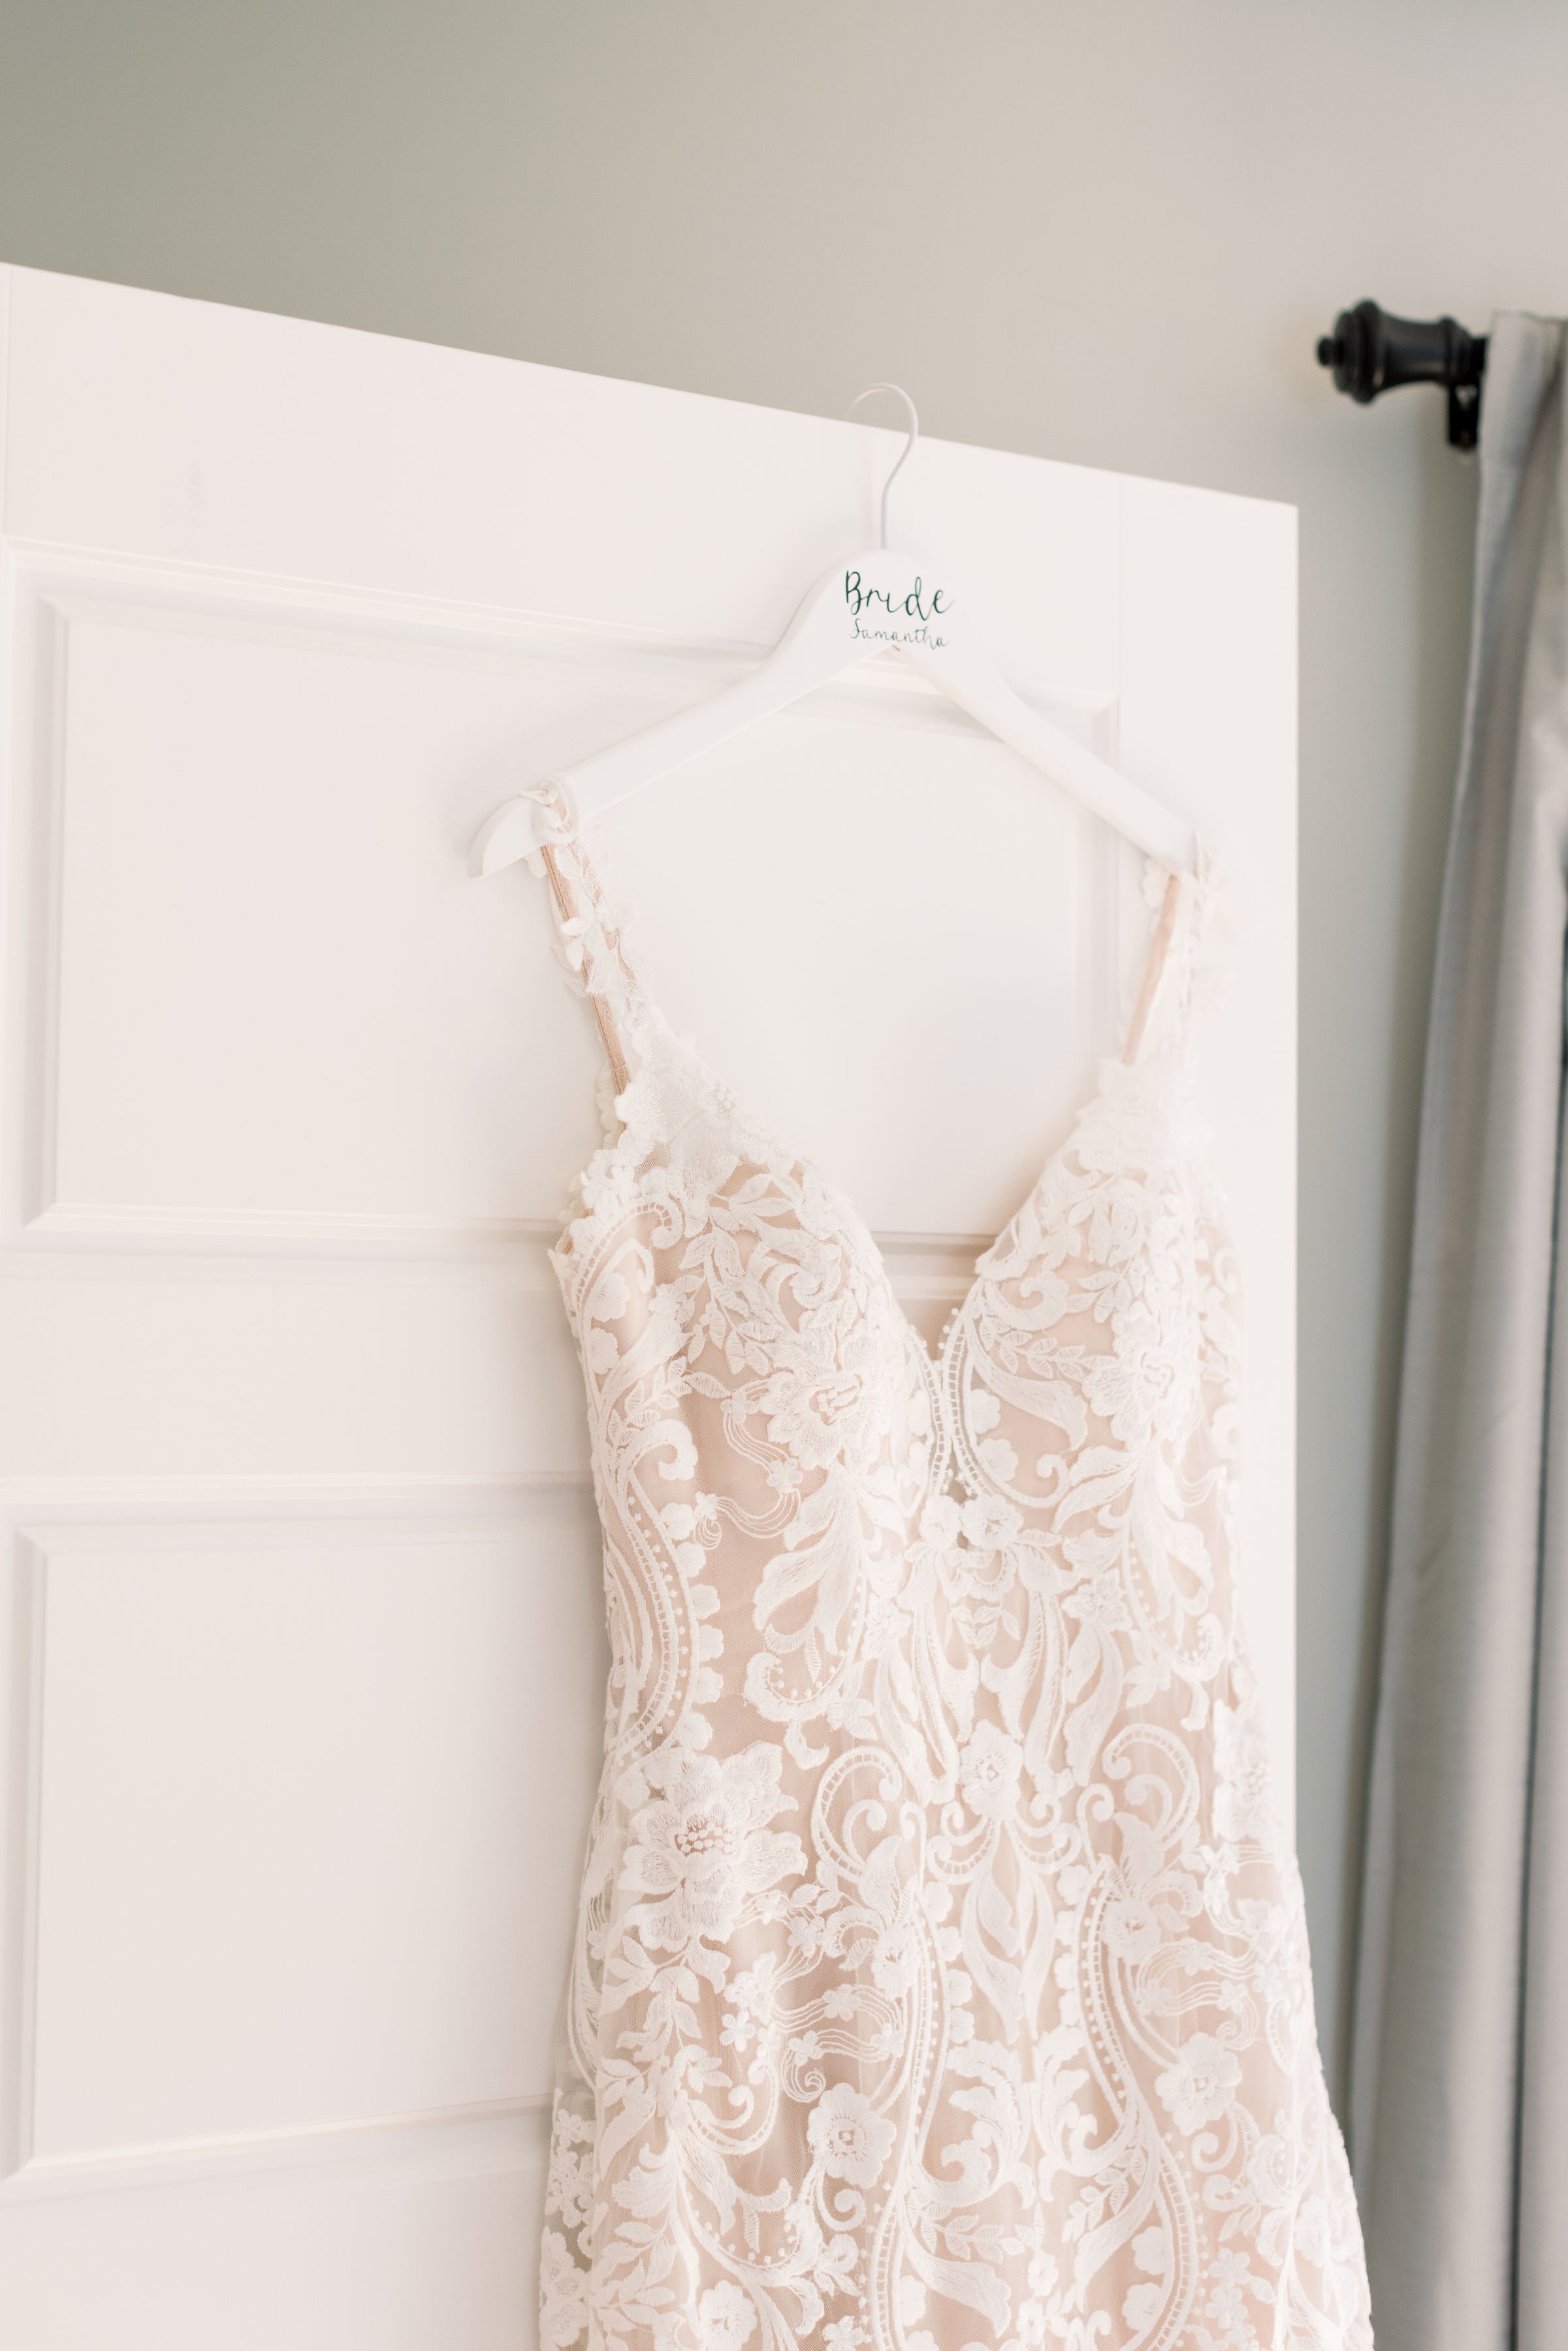  Bridal gown hanging up in the bridal room by Chelsea Mason Photography in Sandbanks, ON. lace wedding gown bridal suite #ChelseaMasonPhotography #ChelseaMasonWeddings #PrinceEdwardsCountyWeddings #SandbanksWeddings #ONweddingphotographer 